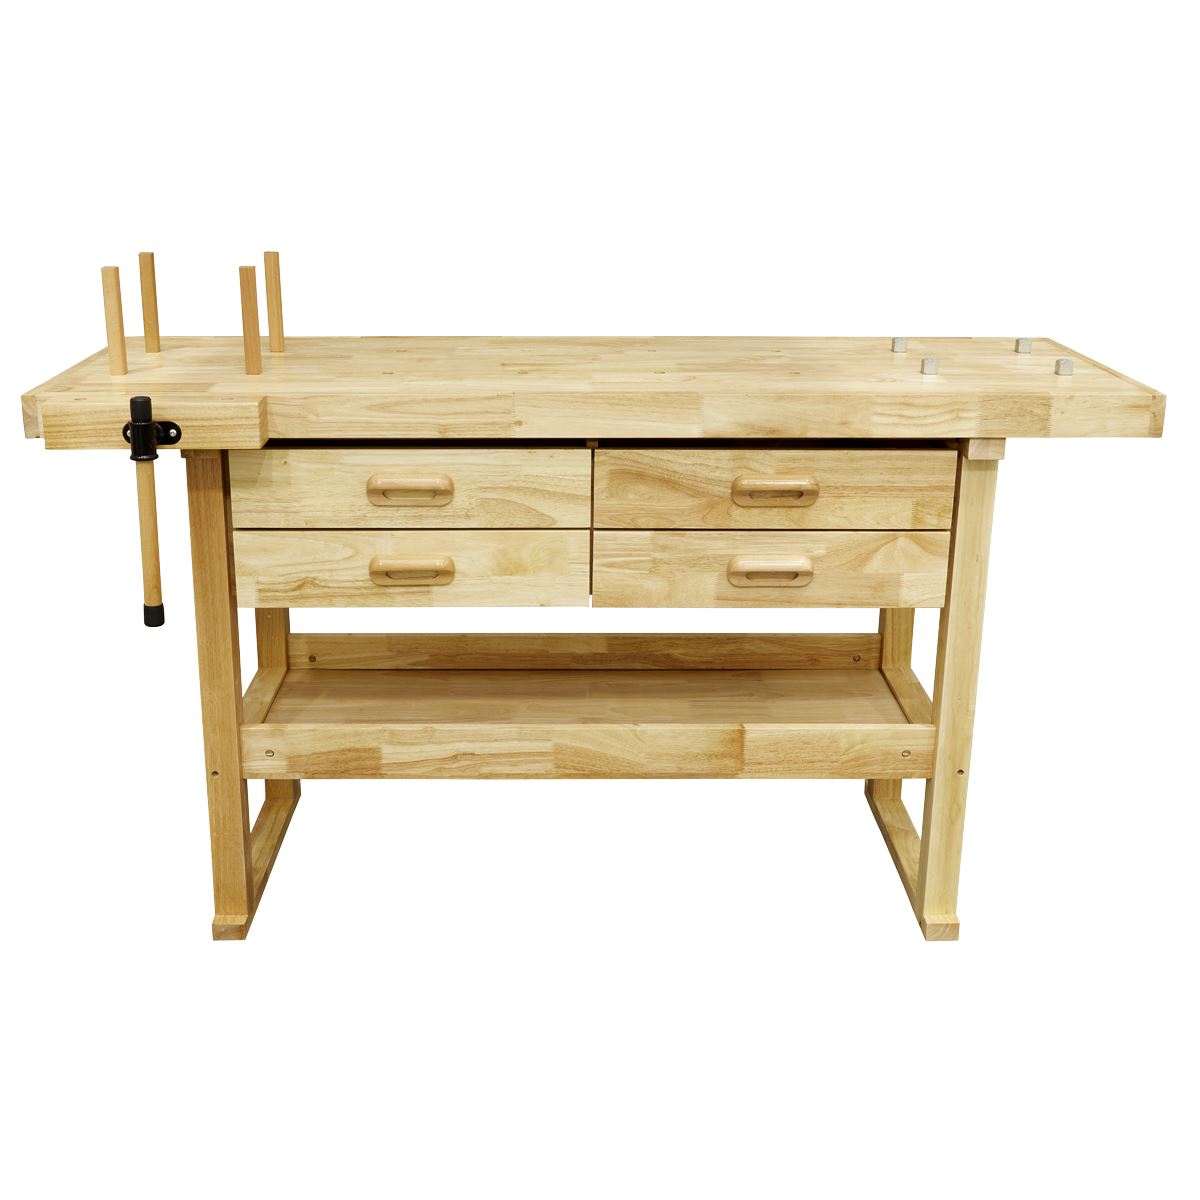 Sealey Woodworking Bench with 4 Drawers